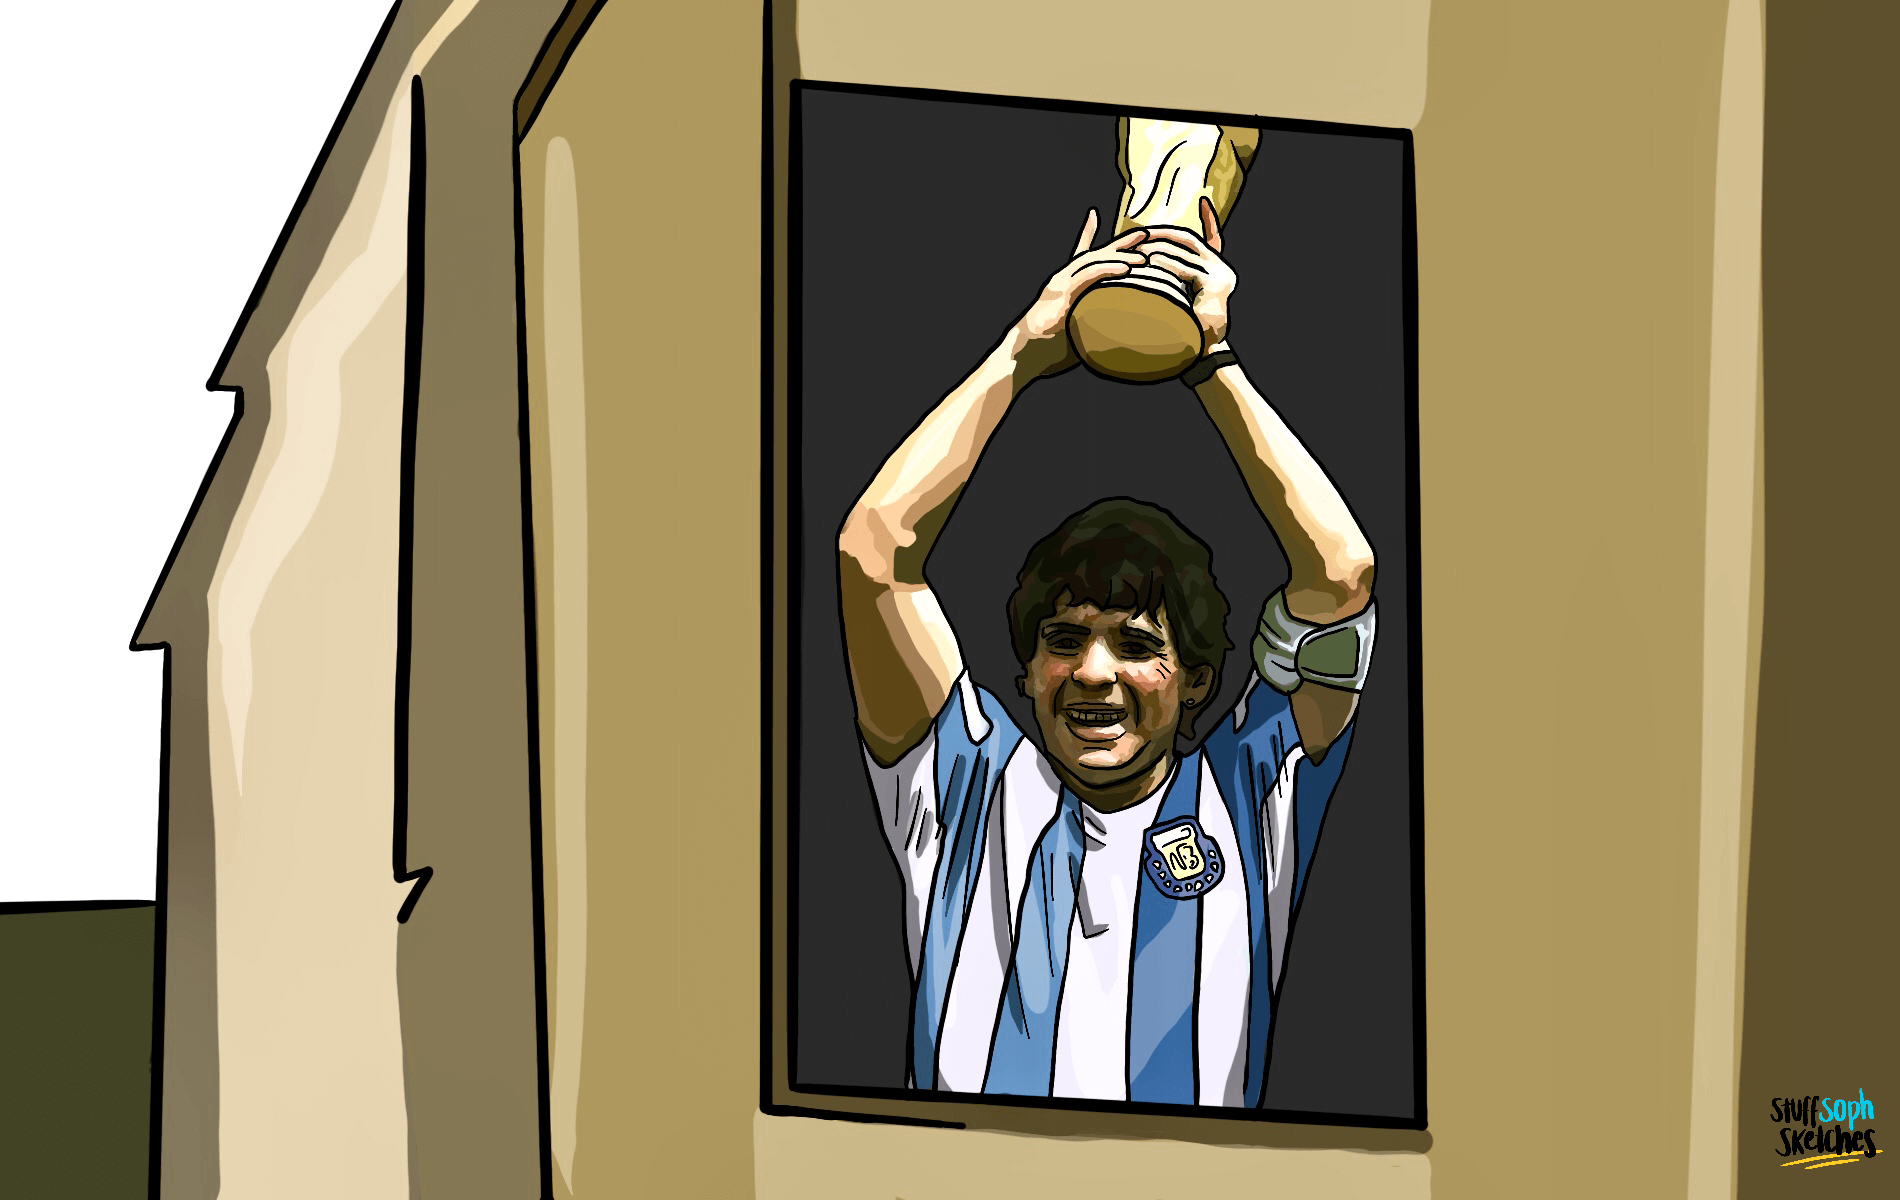 A wall mural of Diego Maradona Lifting the World Cup Trophy